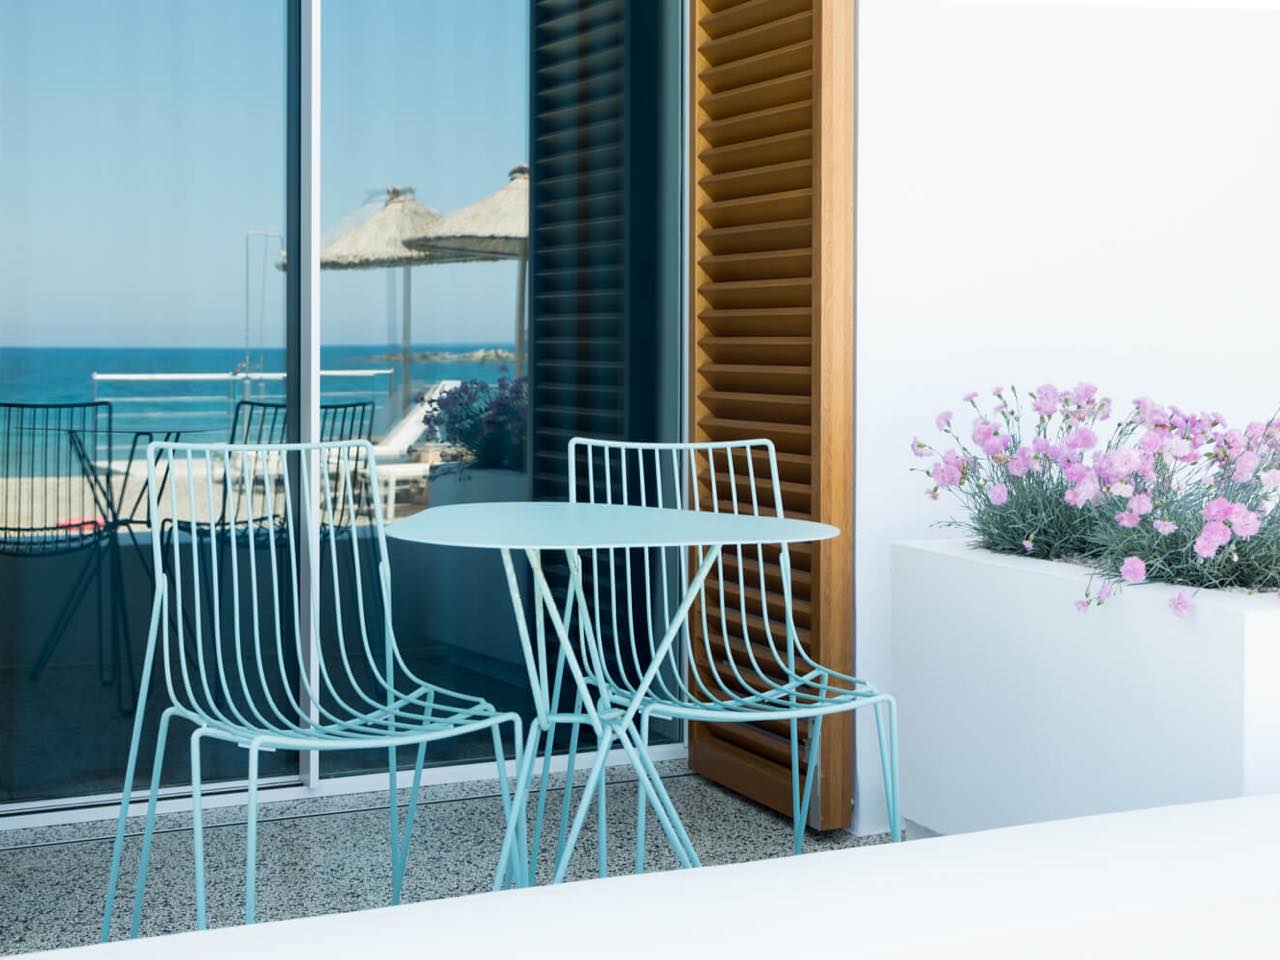 Ammos Boutique Hotel - A Small Seaside Hotel